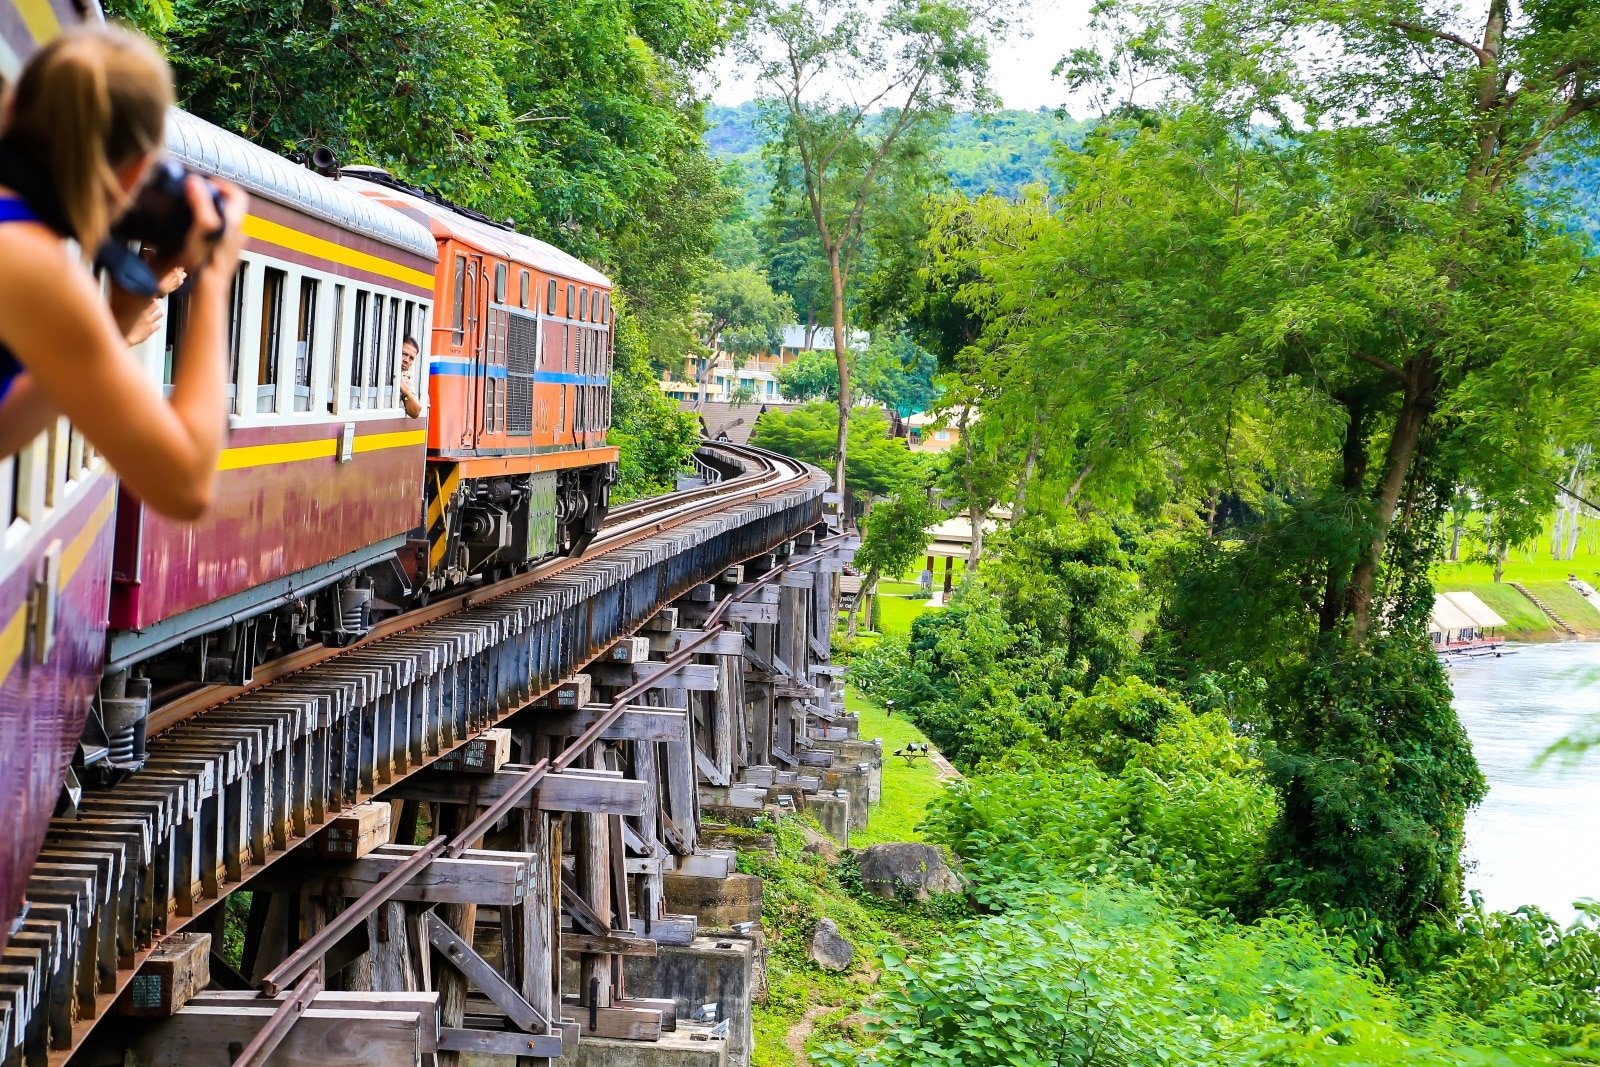 <p><span>As you embark on your journey to Kanchanaburi, remember that you’re stepping into a region rich in history and natural beauty. From the haunting memories of the past at the Bridge Over the River Kwai to the serene cascades of Erawan Falls, each destination offers a unique experience.</span></p> <p><span>Embrace the adventure, respect the history, and immerse yourself in the natural wonders of this captivating region. Kanchanaburi is a journey through time and nature that promises to leave you with lasting memories. So pack your bags, set your itinerary, and get ready to explore the wonders of Kanchanaburi.</span></p> <p><span>More Articles Like This…</span></p> <p><a href="https://thegreenvoyage.com/barcelona-discover-the-top-10-beach-clubs/"><span>Barcelona: Discover the Top 10 Beach Clubs</span></a></p> <p><a href="https://thegreenvoyage.com/top-destination-cities-to-visit/"><span>2024 Global City Travel Guide – Your Passport to the World’s Top Destination Cities</span></a></p> <p><a href="https://thegreenvoyage.com/exploring-khao-yai-a-hidden-gem-of-thailand/"><span>Exploring Khao Yai 2024 – A Hidden Gem of Thailand</span></a></p> <p><span>The post <a href="https://passingthru.com/tips-for-exploring-kanchanaburi/">Exploring Kanchanaburi: 10 Tips for Exploring the Enigmatic Bridge Over the River Kwai</a> republished on </span><a href="https://passingthru.com/"><span>Passing Thru</span></a><span> with permission from </span><a href="https://thegreenvoyage.com/"><span>The Green Voyage</span></a><span>.</span></p> <p><span>Featured Image Credit: Shutterstock / gowithstock.</span></p> <p><span>For transparency, this content was partly developed with AI assistance and carefully curated by an experienced editor to be informative and ensure accuracy.</span></p>